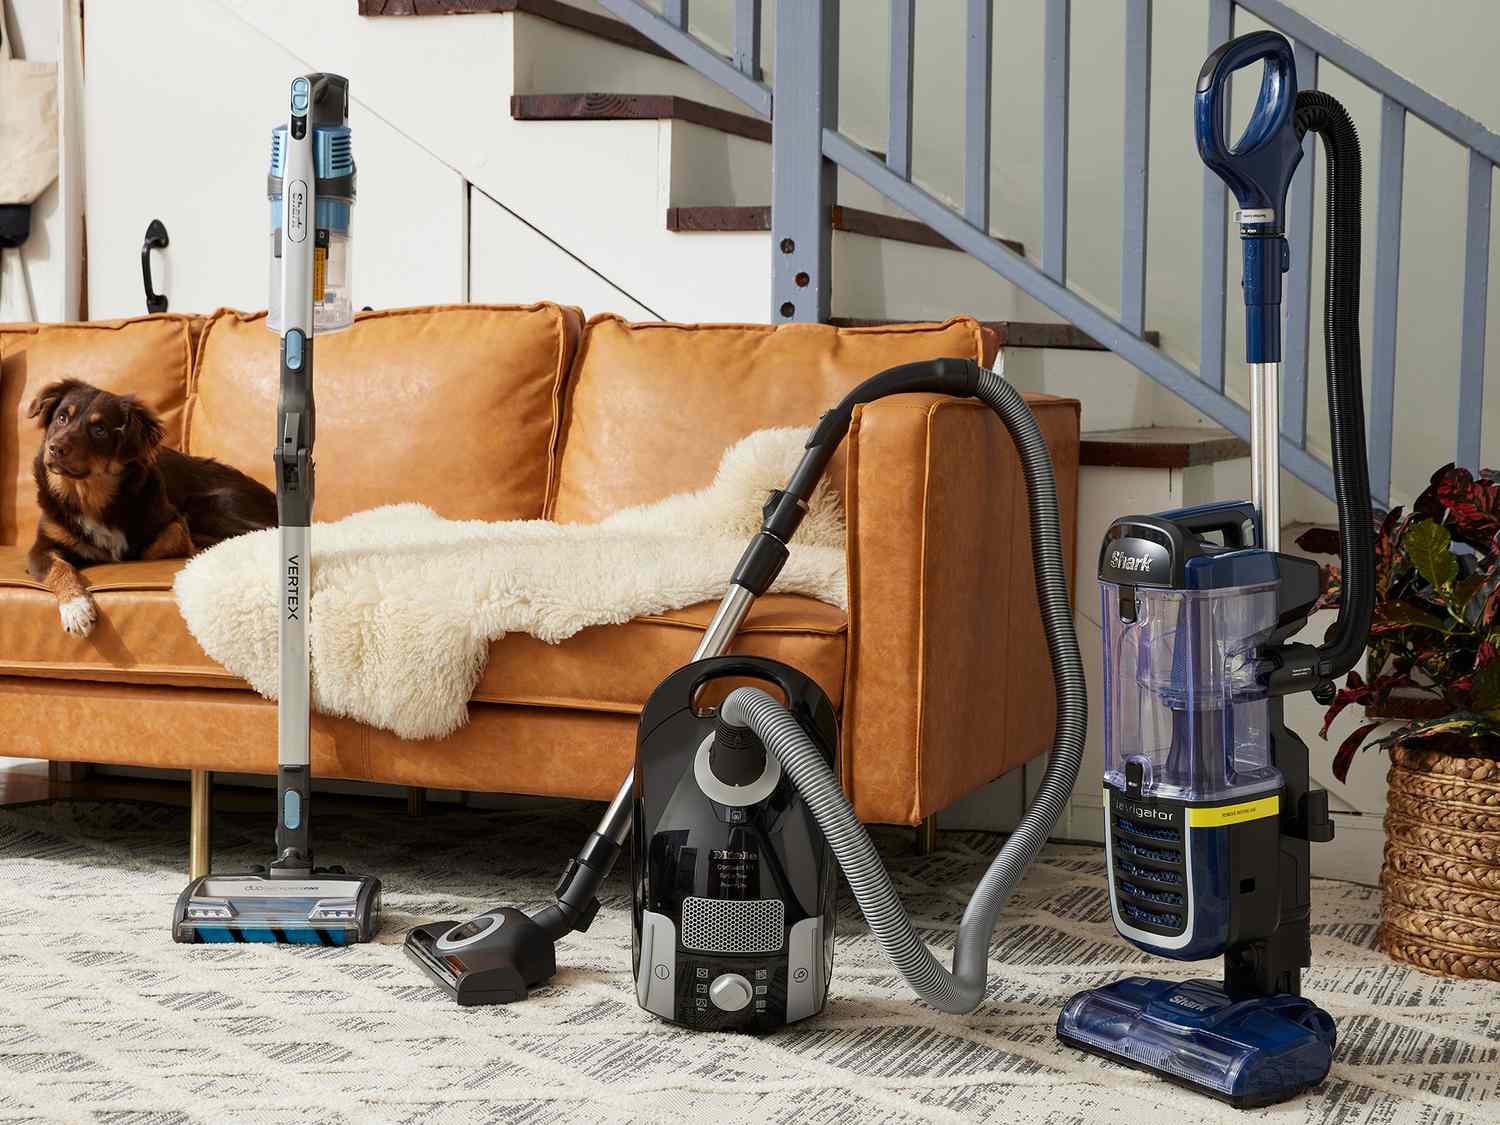 Several vacuums displayed in a living room